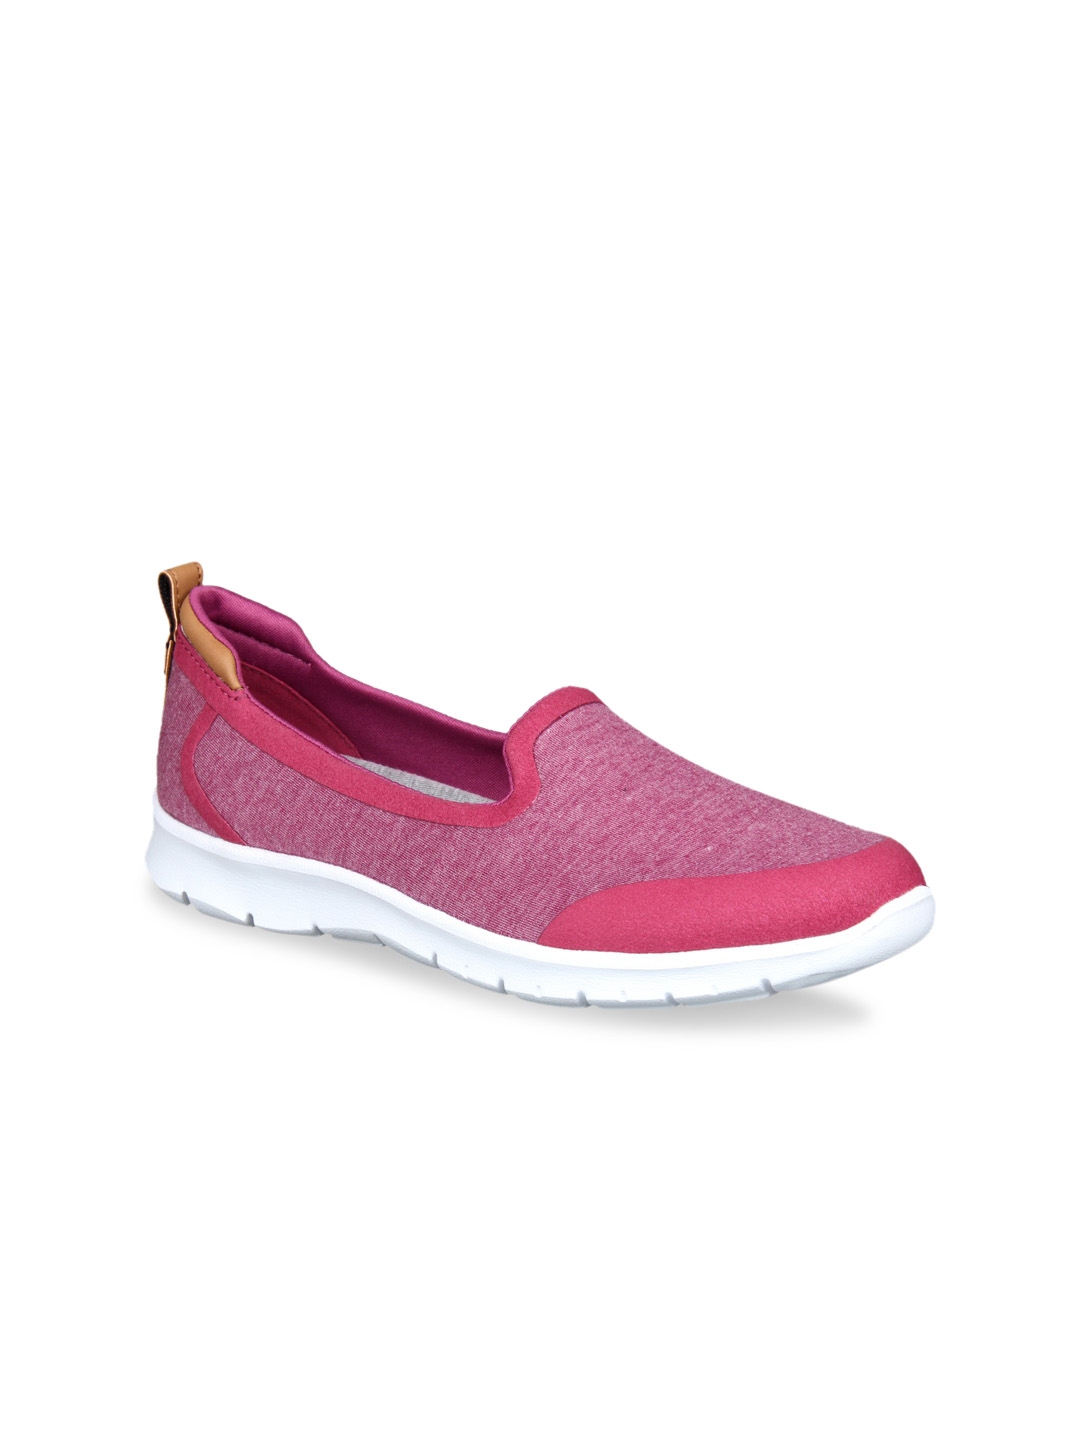 Buy Clarks Women Pink Slip On Sneakers - Casual Shoes for Women 7492594 ...